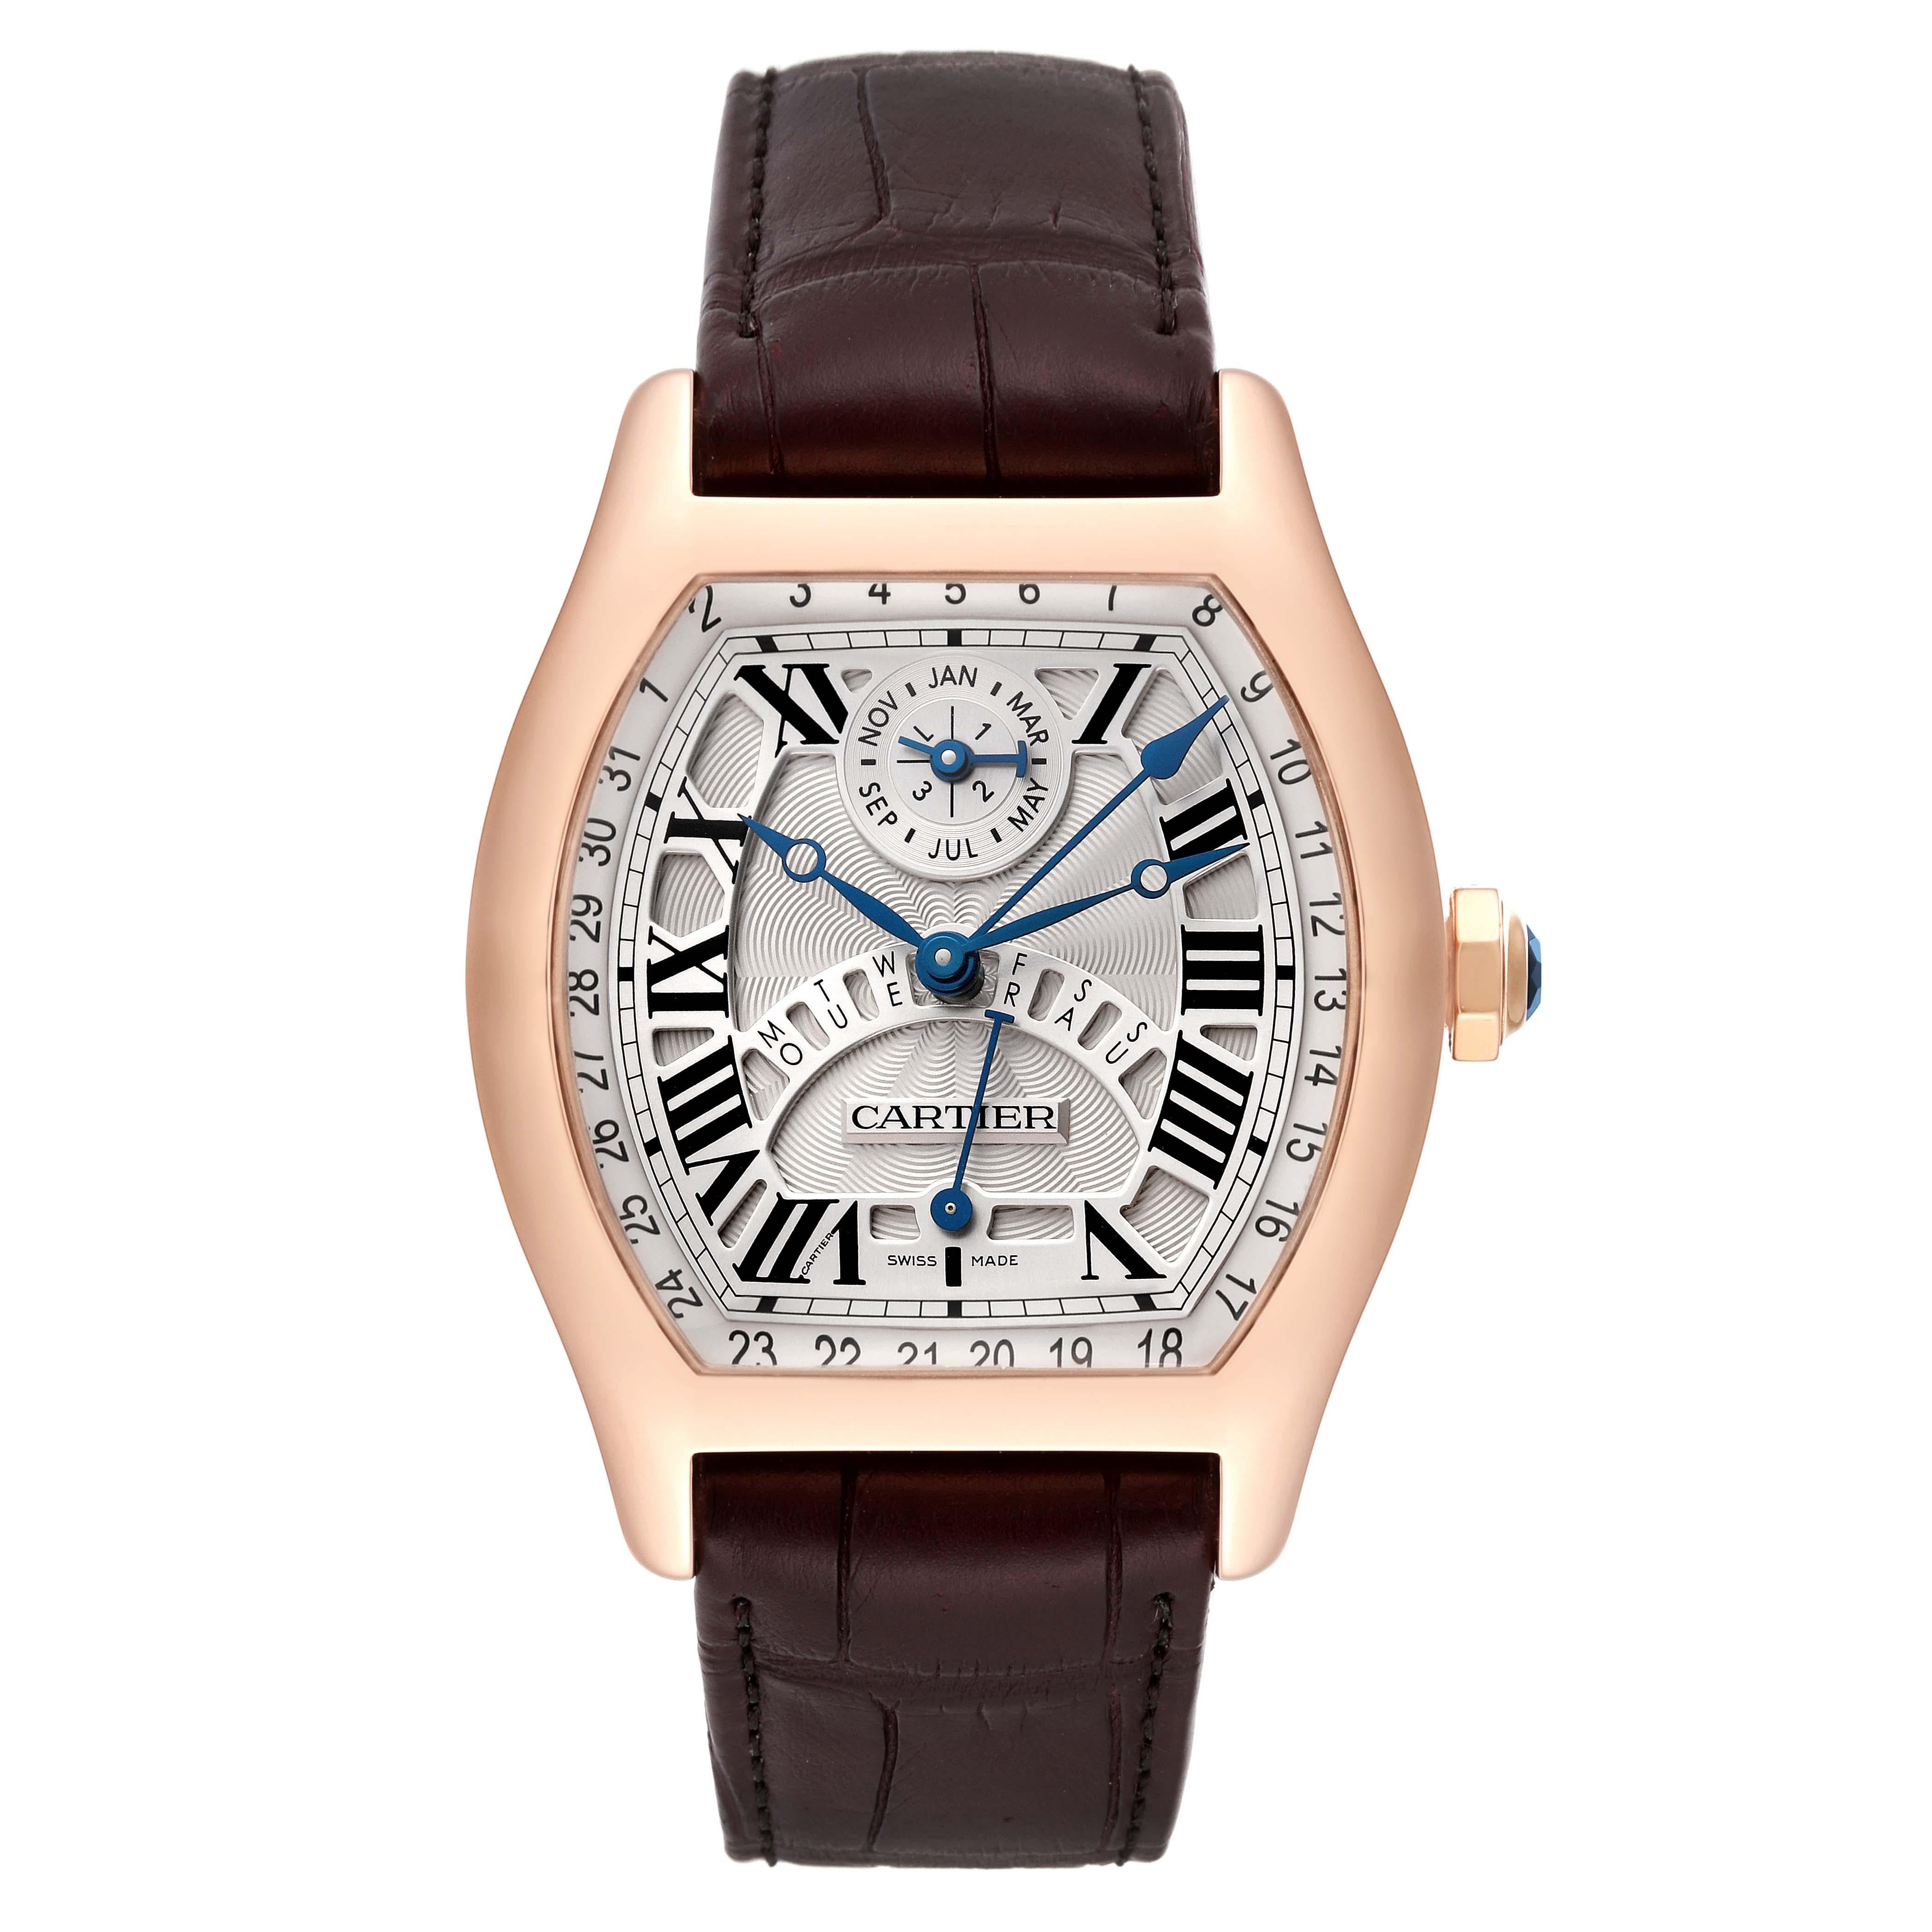 Cartier Tortue Perpetual Calendar Automatic Rose Gold Mens Watch W1580045 For Sale 2